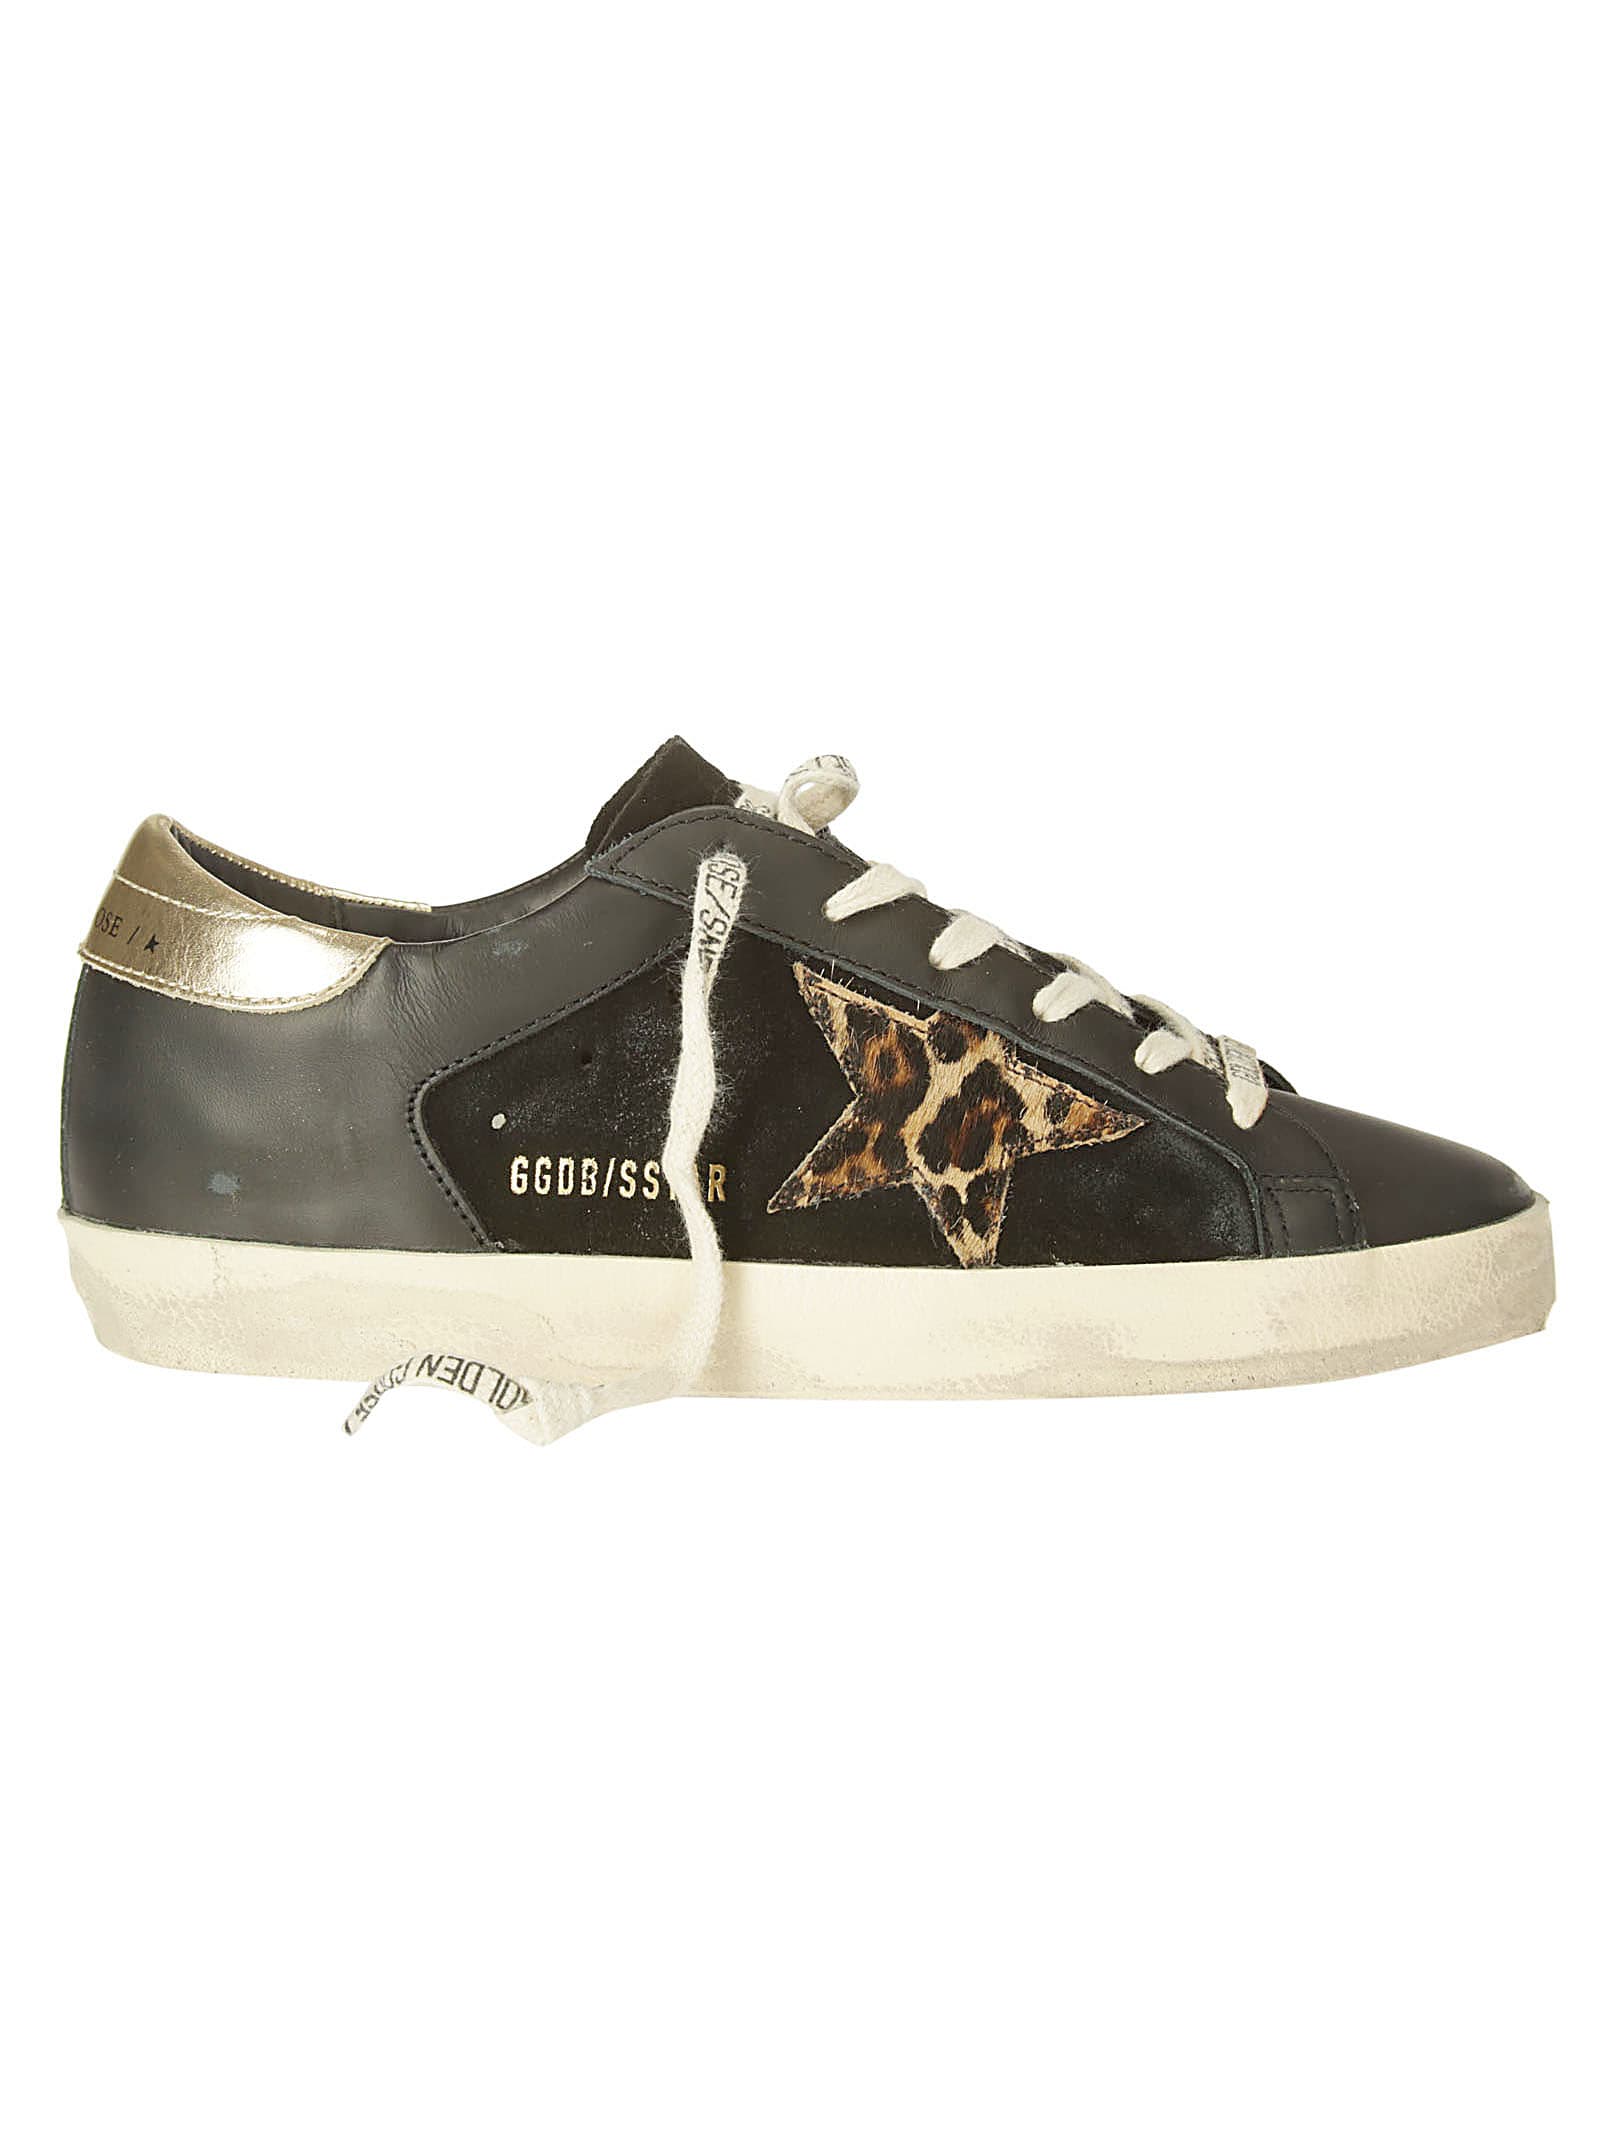 GOLDEN GOOSE SUPER-STAR SUEDE AND LEATHER UPPER